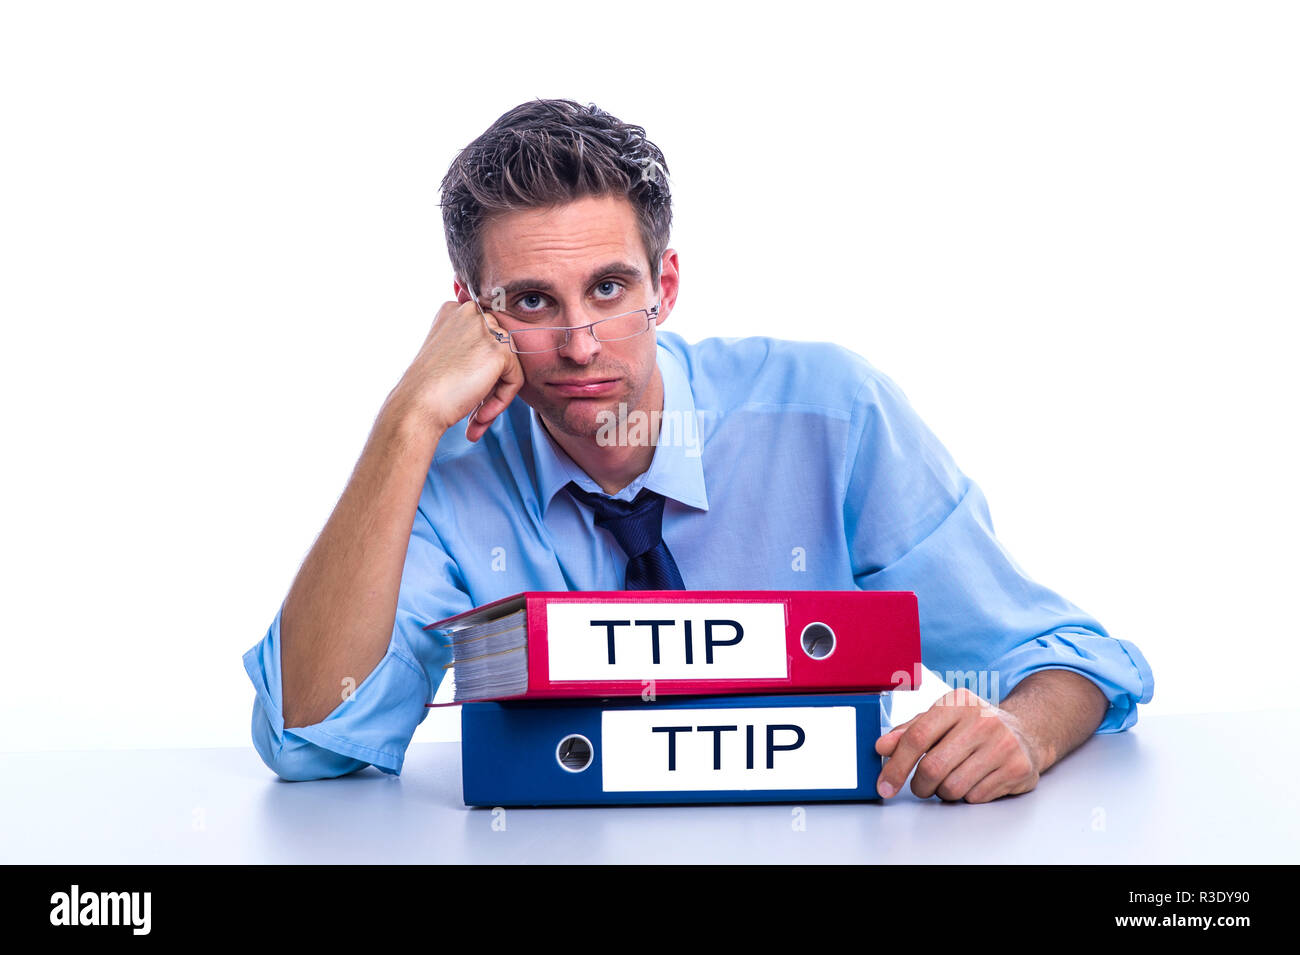 ttip trade agreements Stock Photo